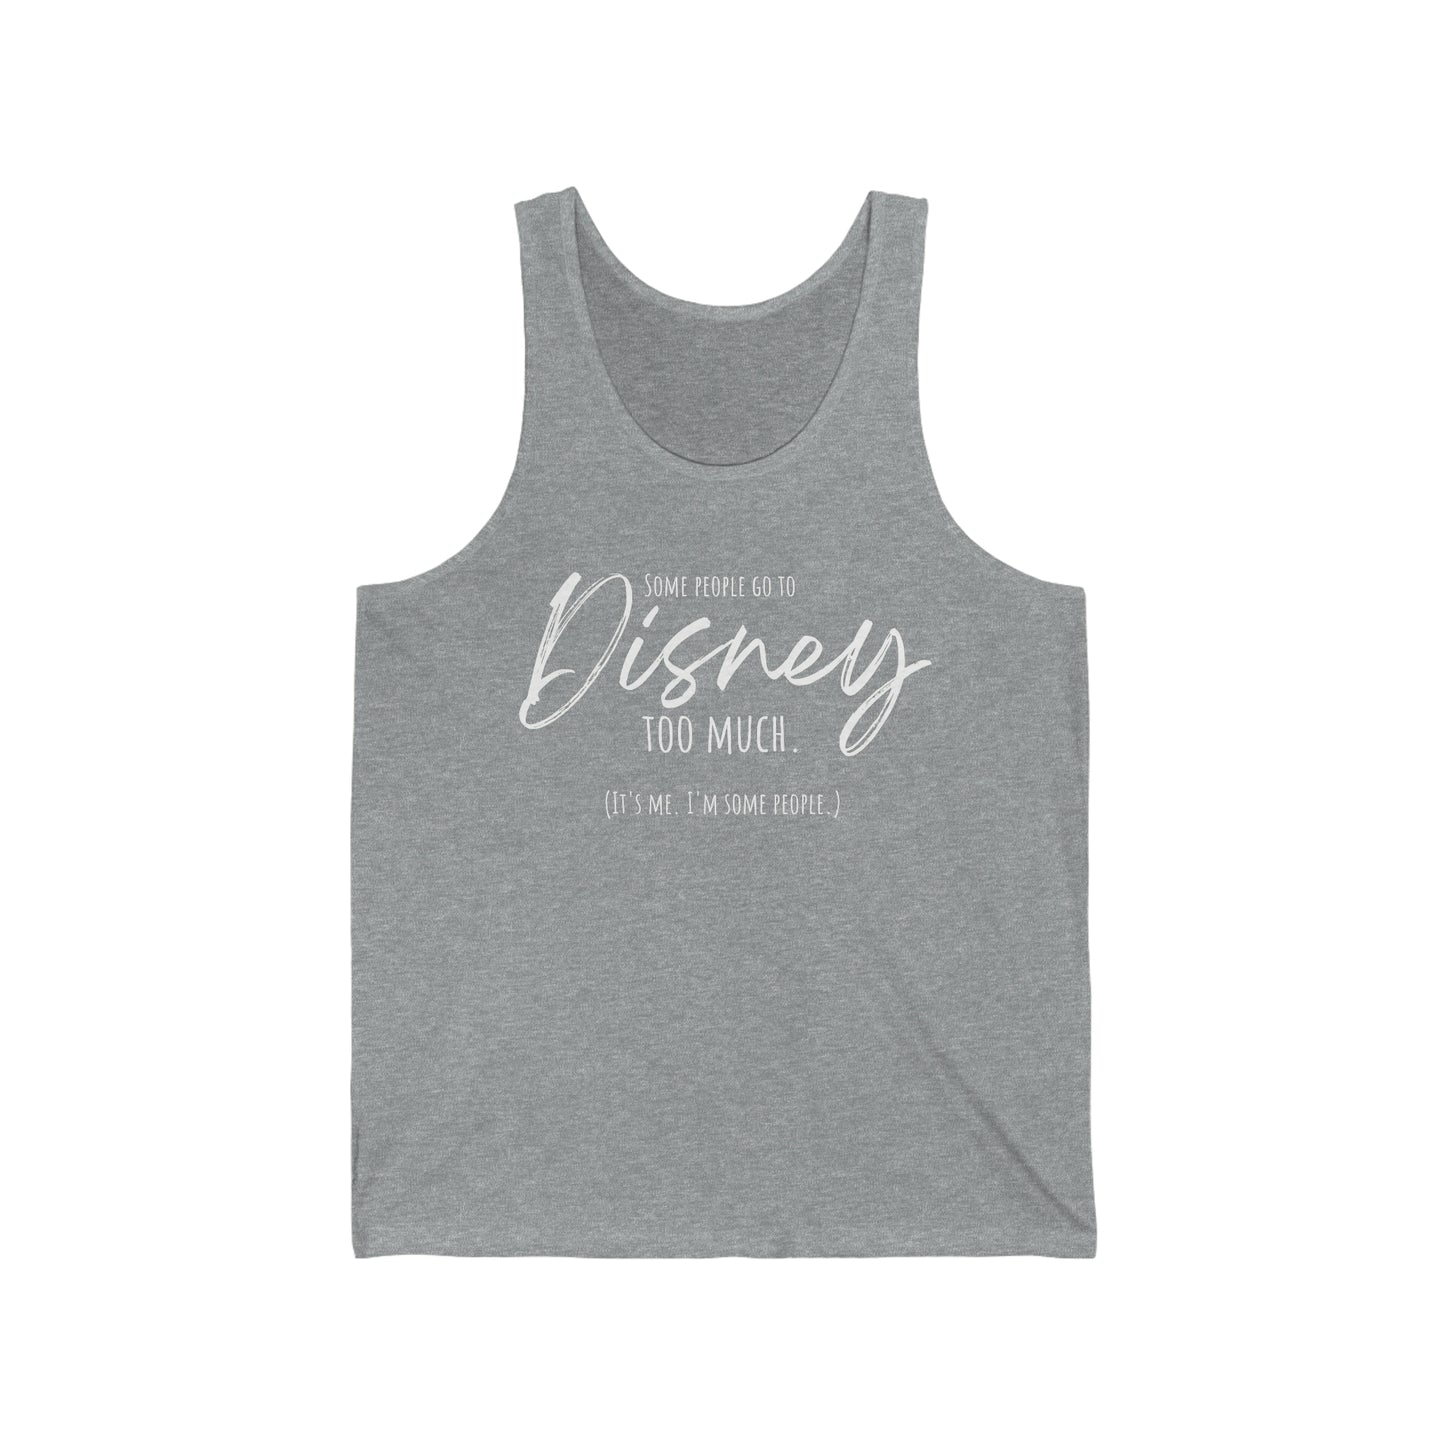 Some People Go To Disney Too Much - Unisex Jersey Tank